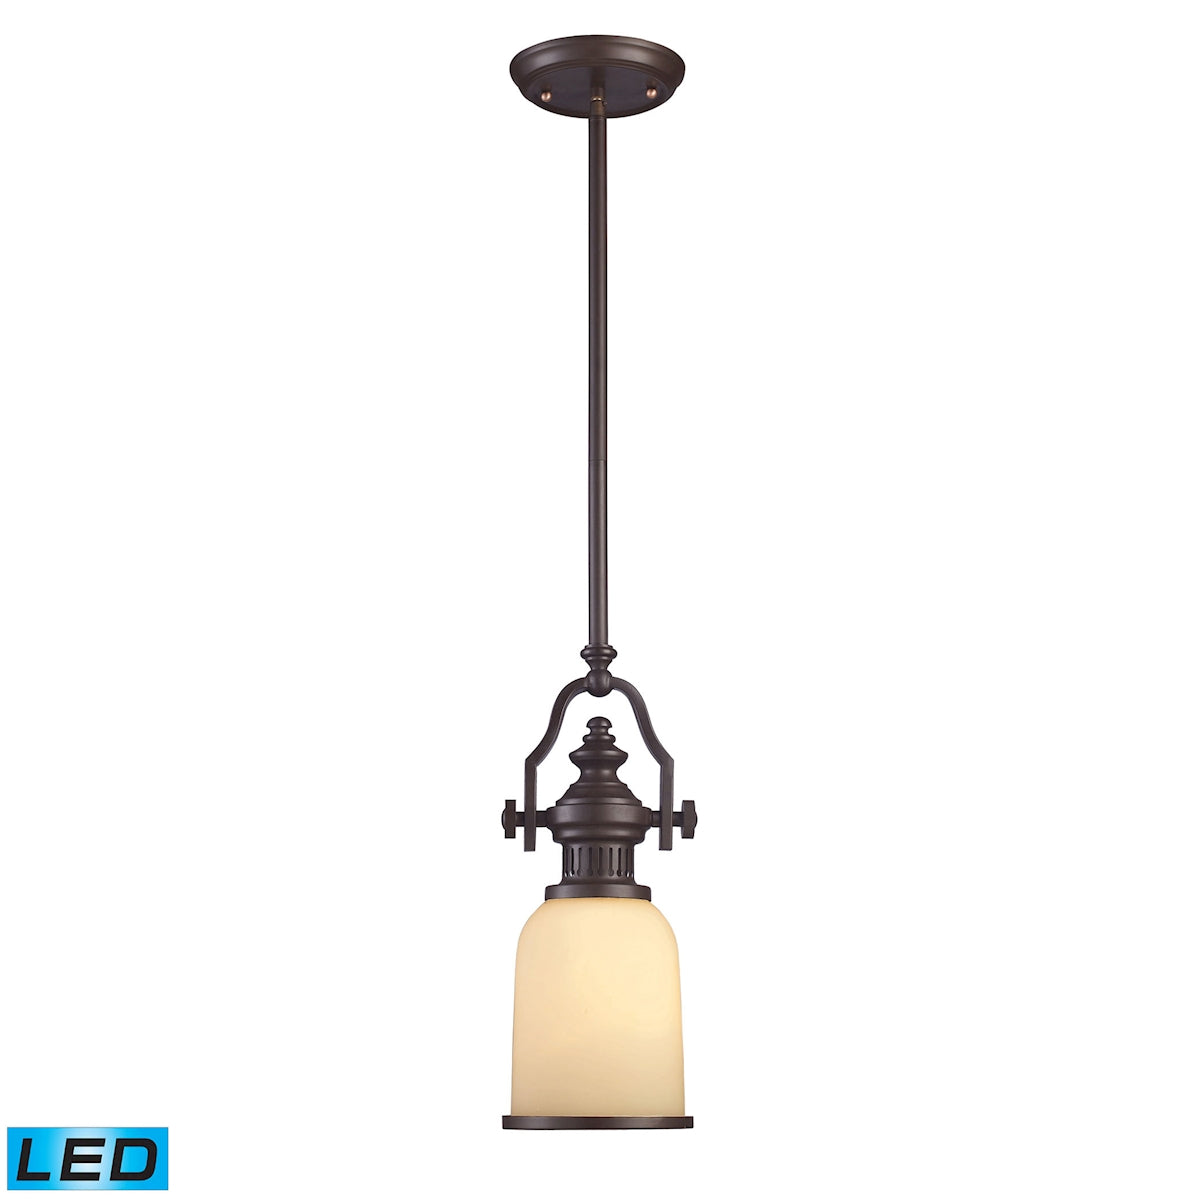 ELK Lighting 66132-1-LED Chadwick 1-Light Mini Pendant in Oiled Bronze with Off-white Glass - Includes LED Bulb